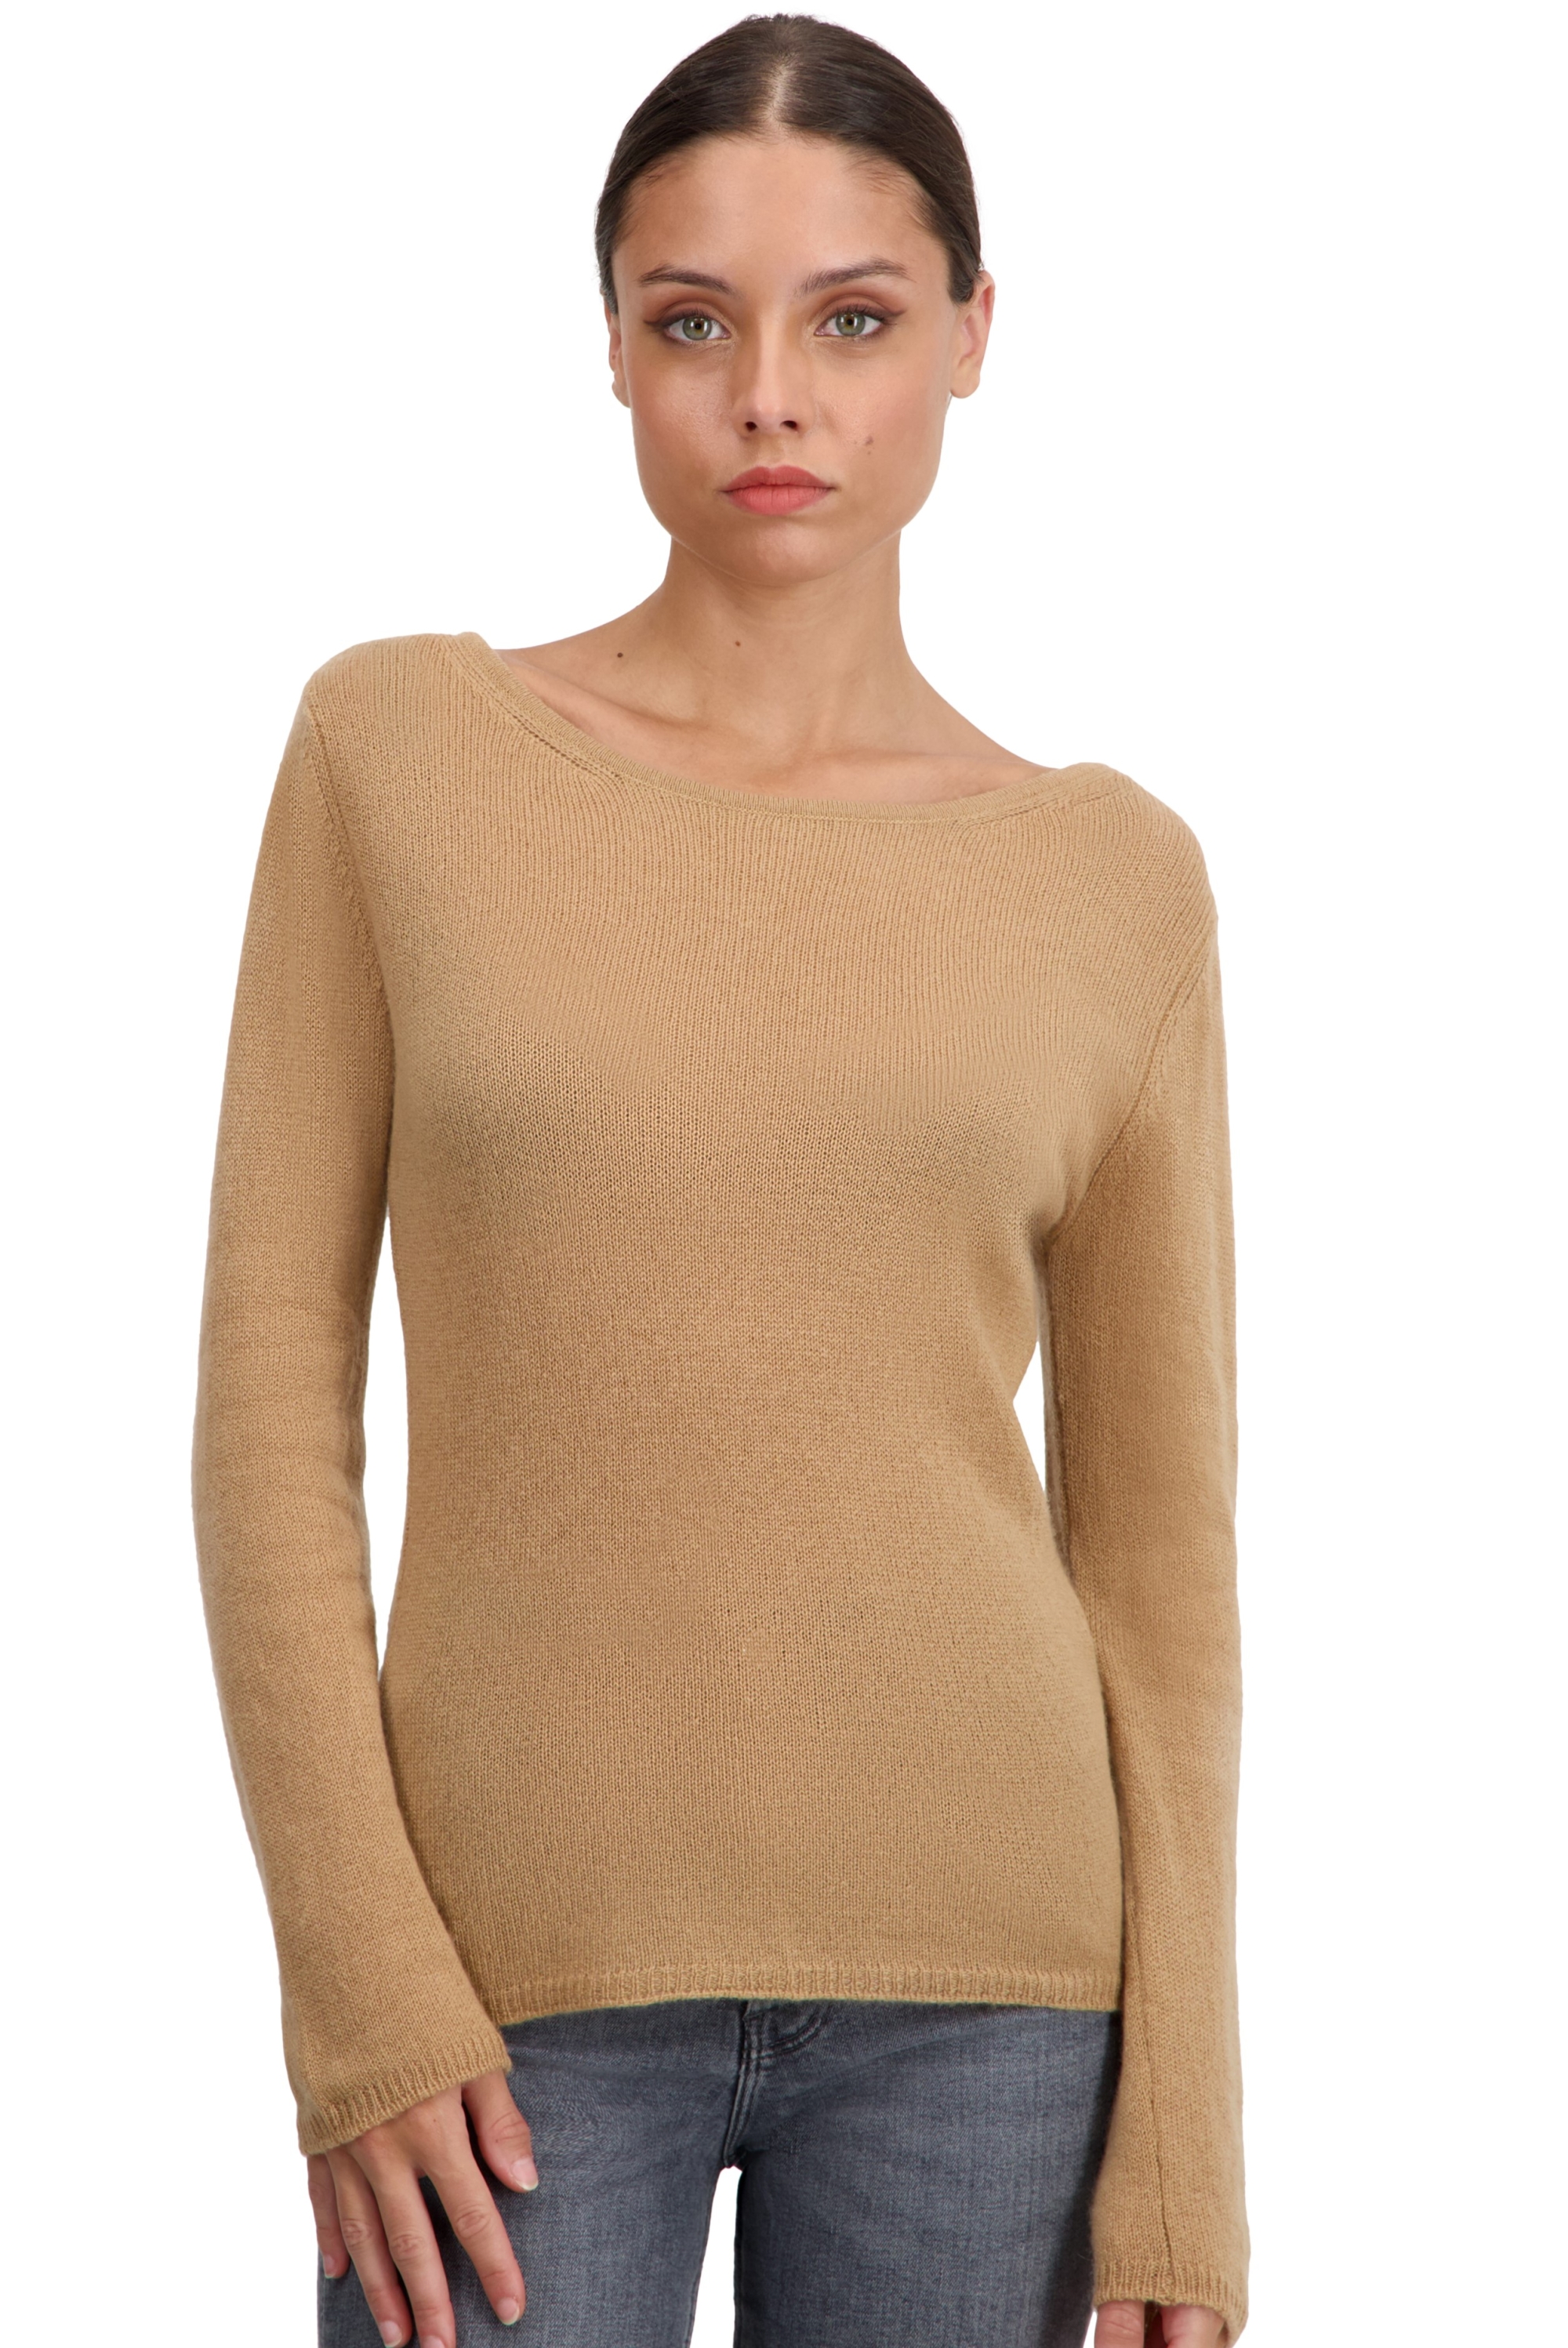 Cashmere ladies basic sweaters at low prices caleen camel 3xl